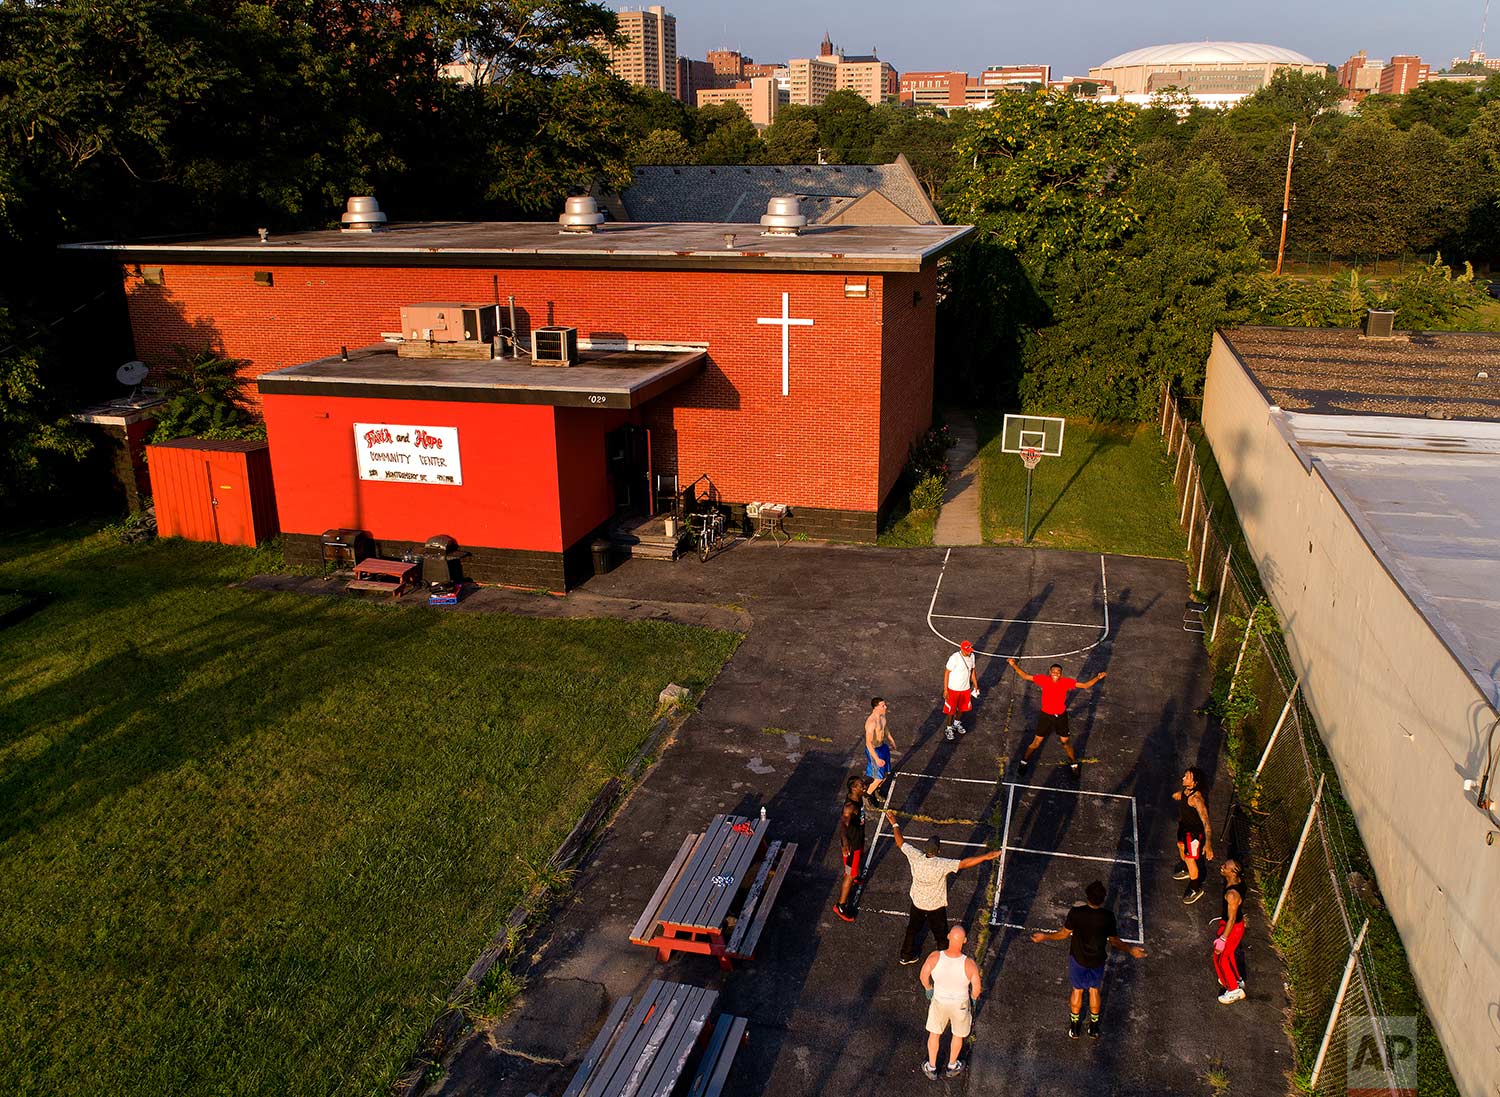  A group of teenagers and young men exercise outside the Faith and Hope Community Center in the South Side neighborhood just down the hill from Syracuse University's Carrier Dome, Monday, Aug. 21, 2017, in Syracuse, N.Y. Coach and mentor Arthur “Bobb